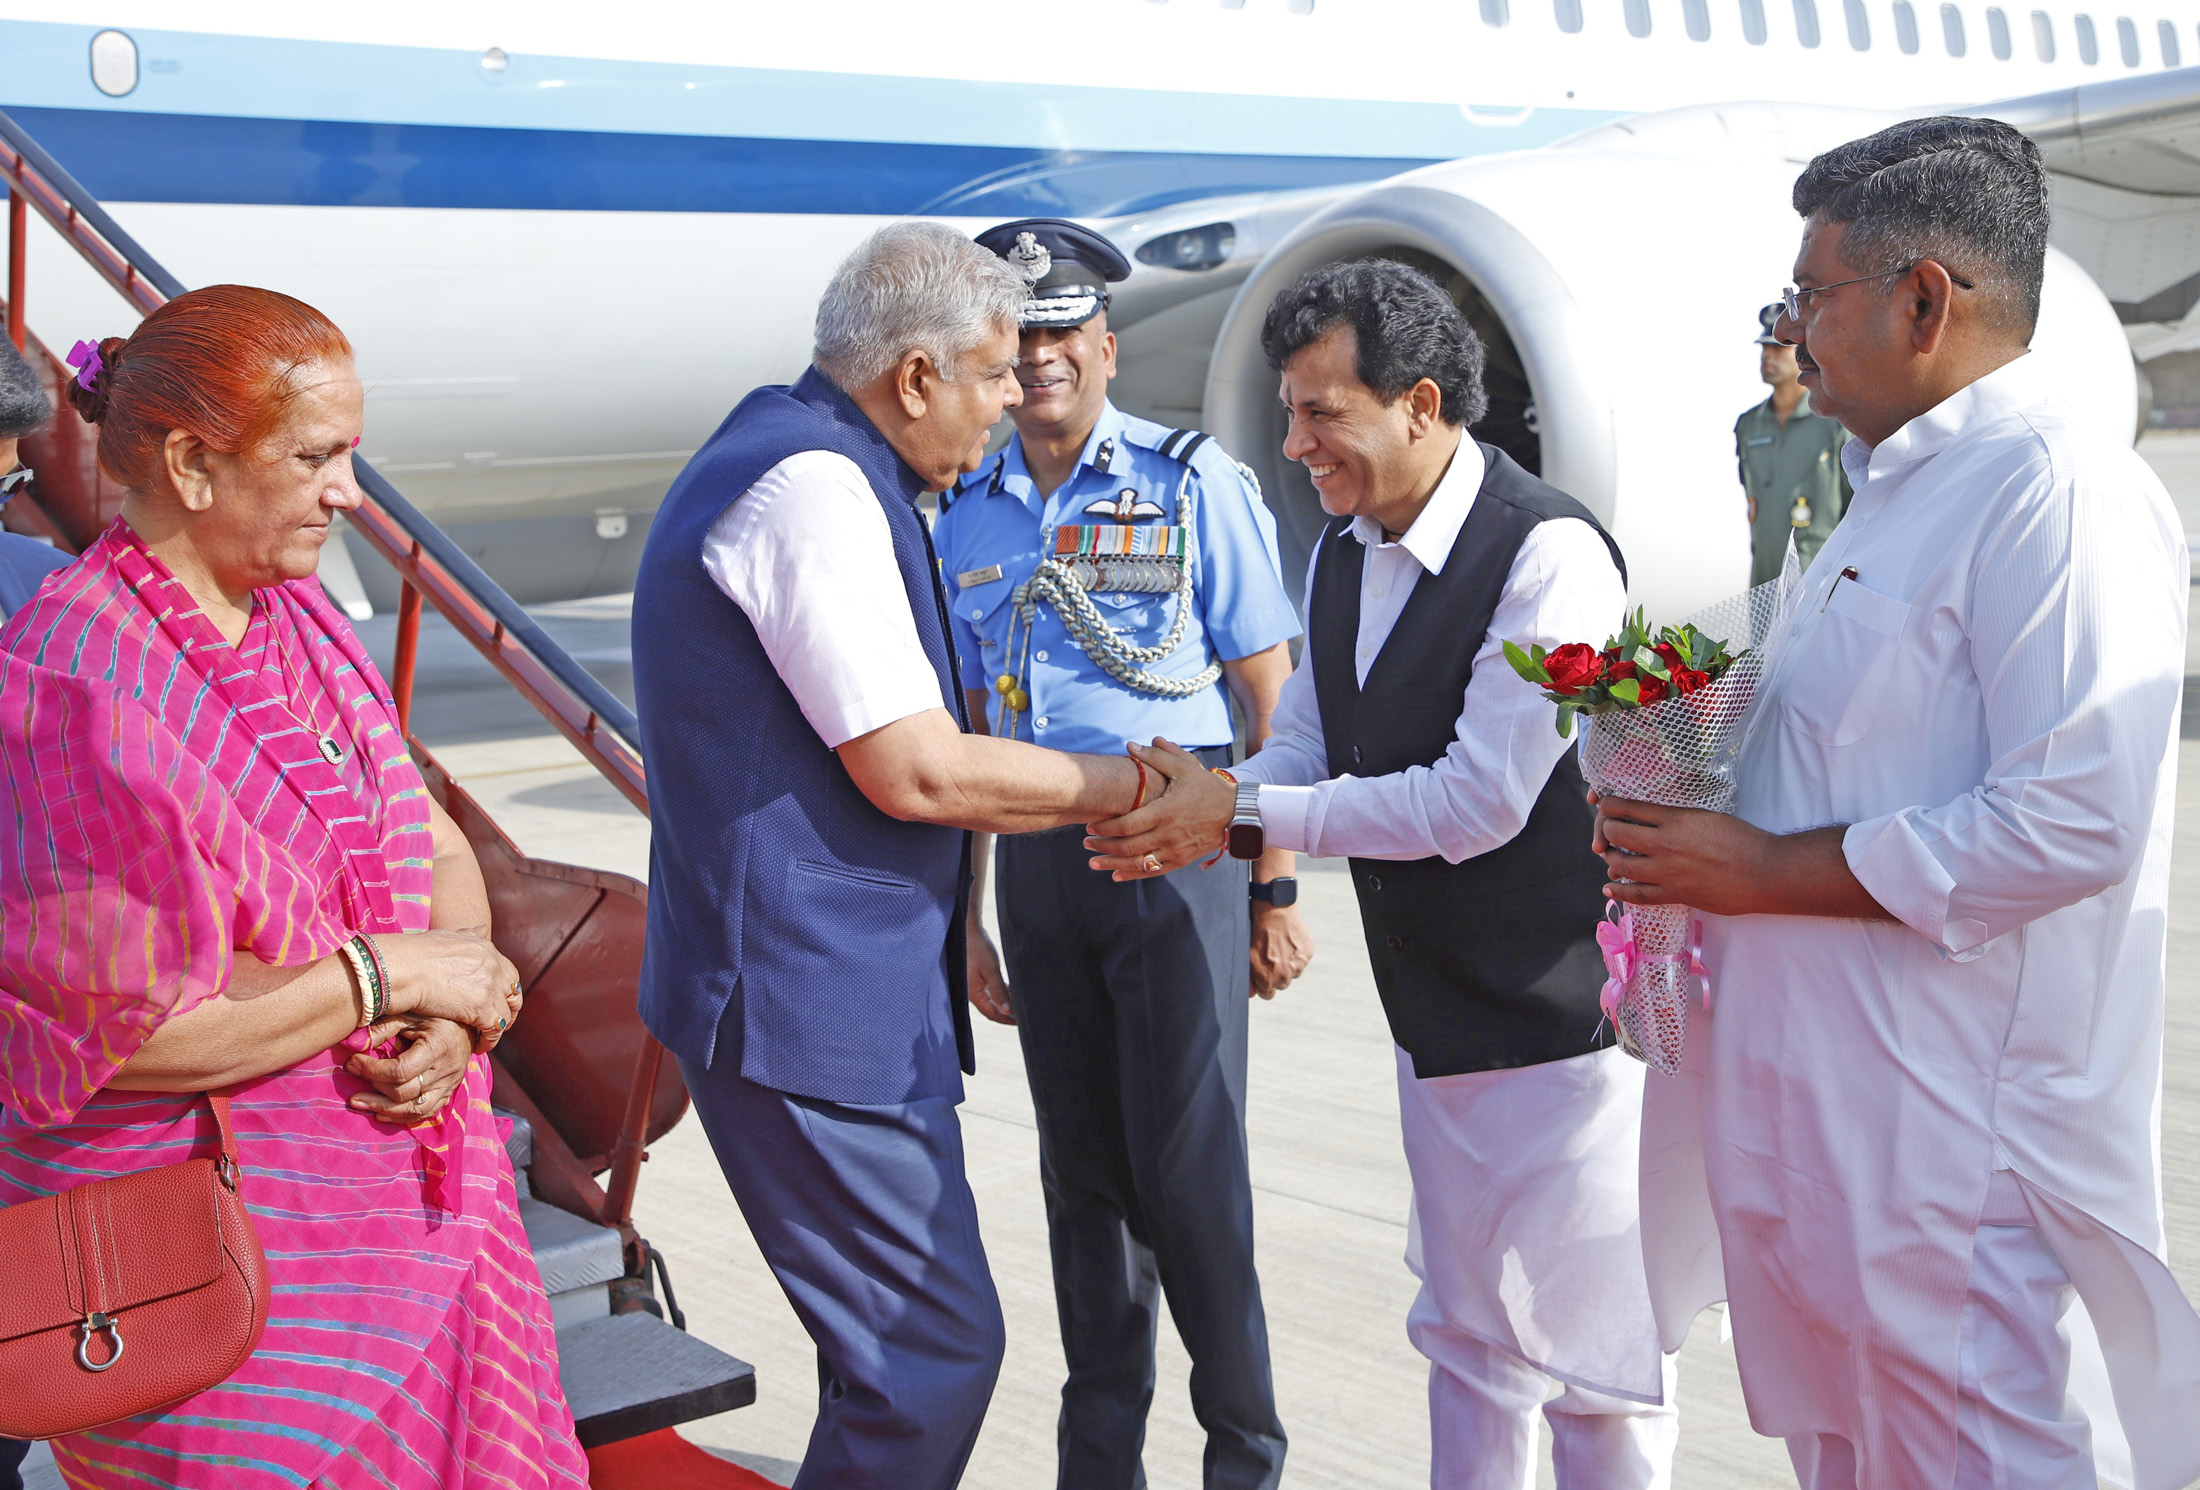 The Vice-President, Shri Jagdeep Dhankhar and Dr Sudesh Dhankhar being welcomed by Union Minister, Shri Kailash Choudhary and Minister of Rajasthan Government, Shri Bhanwar Singh Bhati on their arrival in Suratgarh, Rajasthan on October 7, 2023.